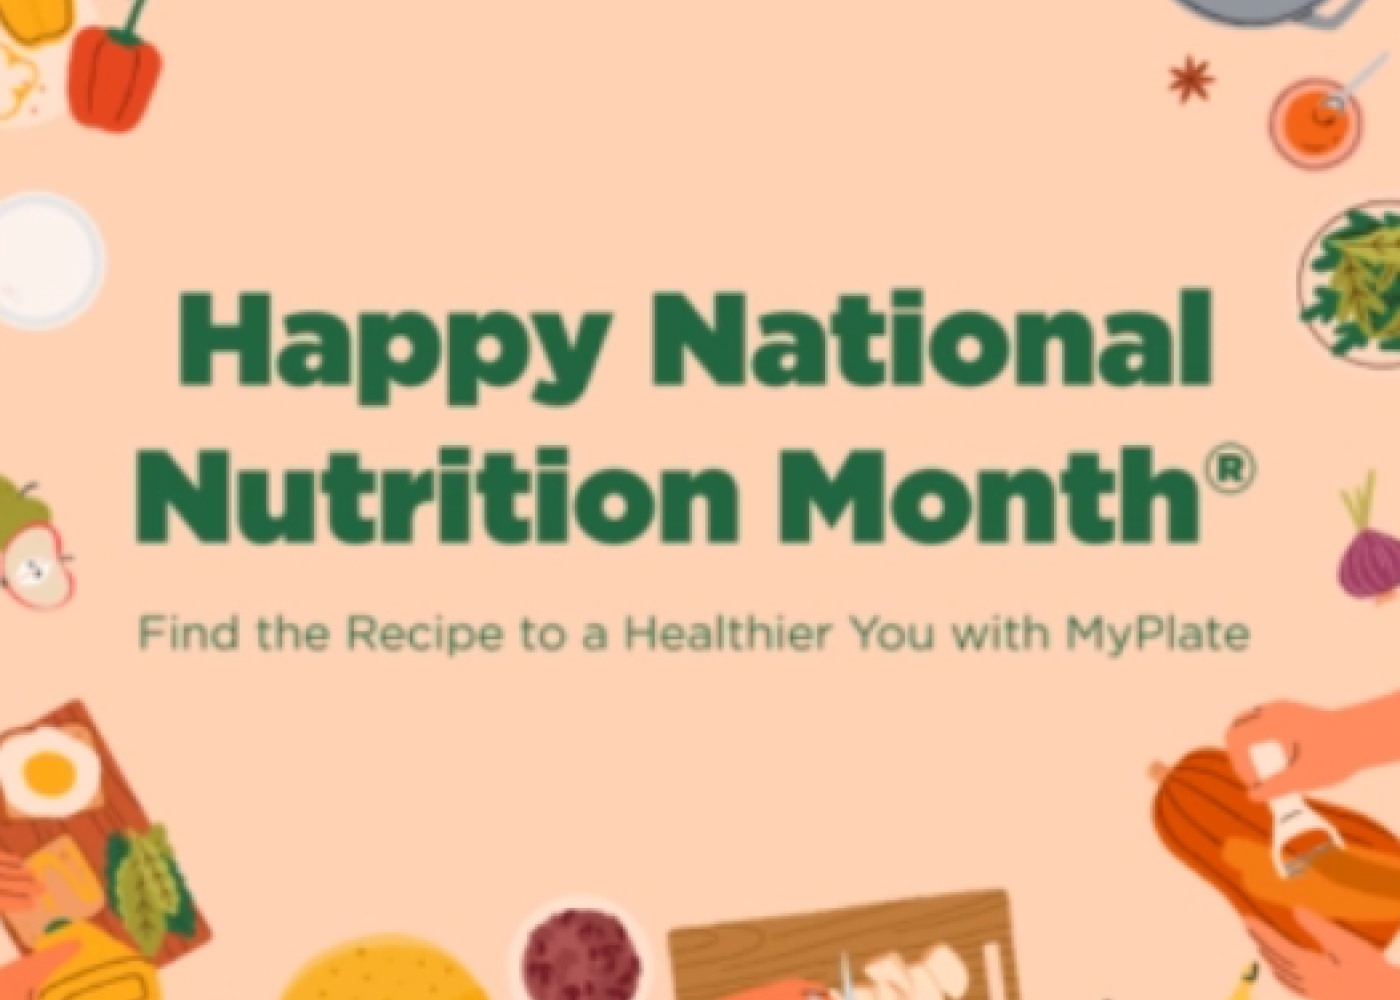 Happy National Nutrition Month